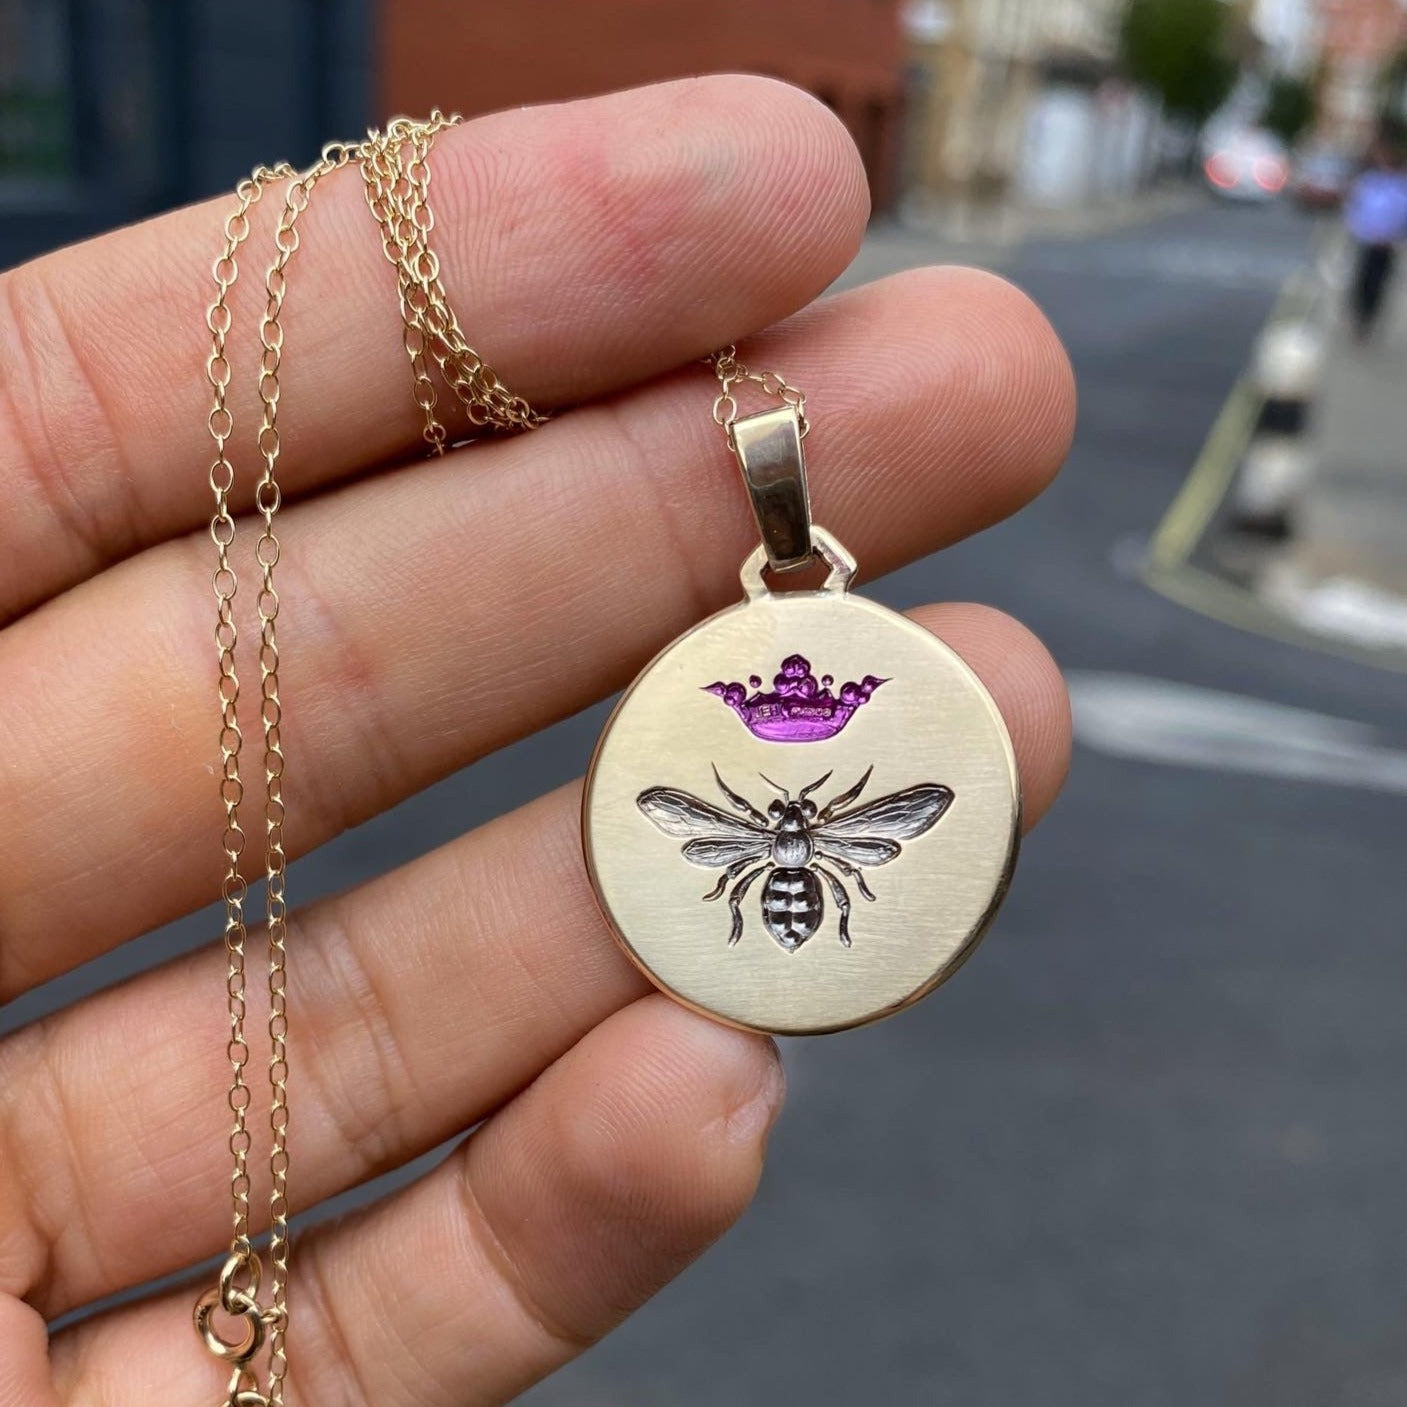 Castro Smith Jewelry Gold Queen Bee Pendant Necklace with Purple Engravings.